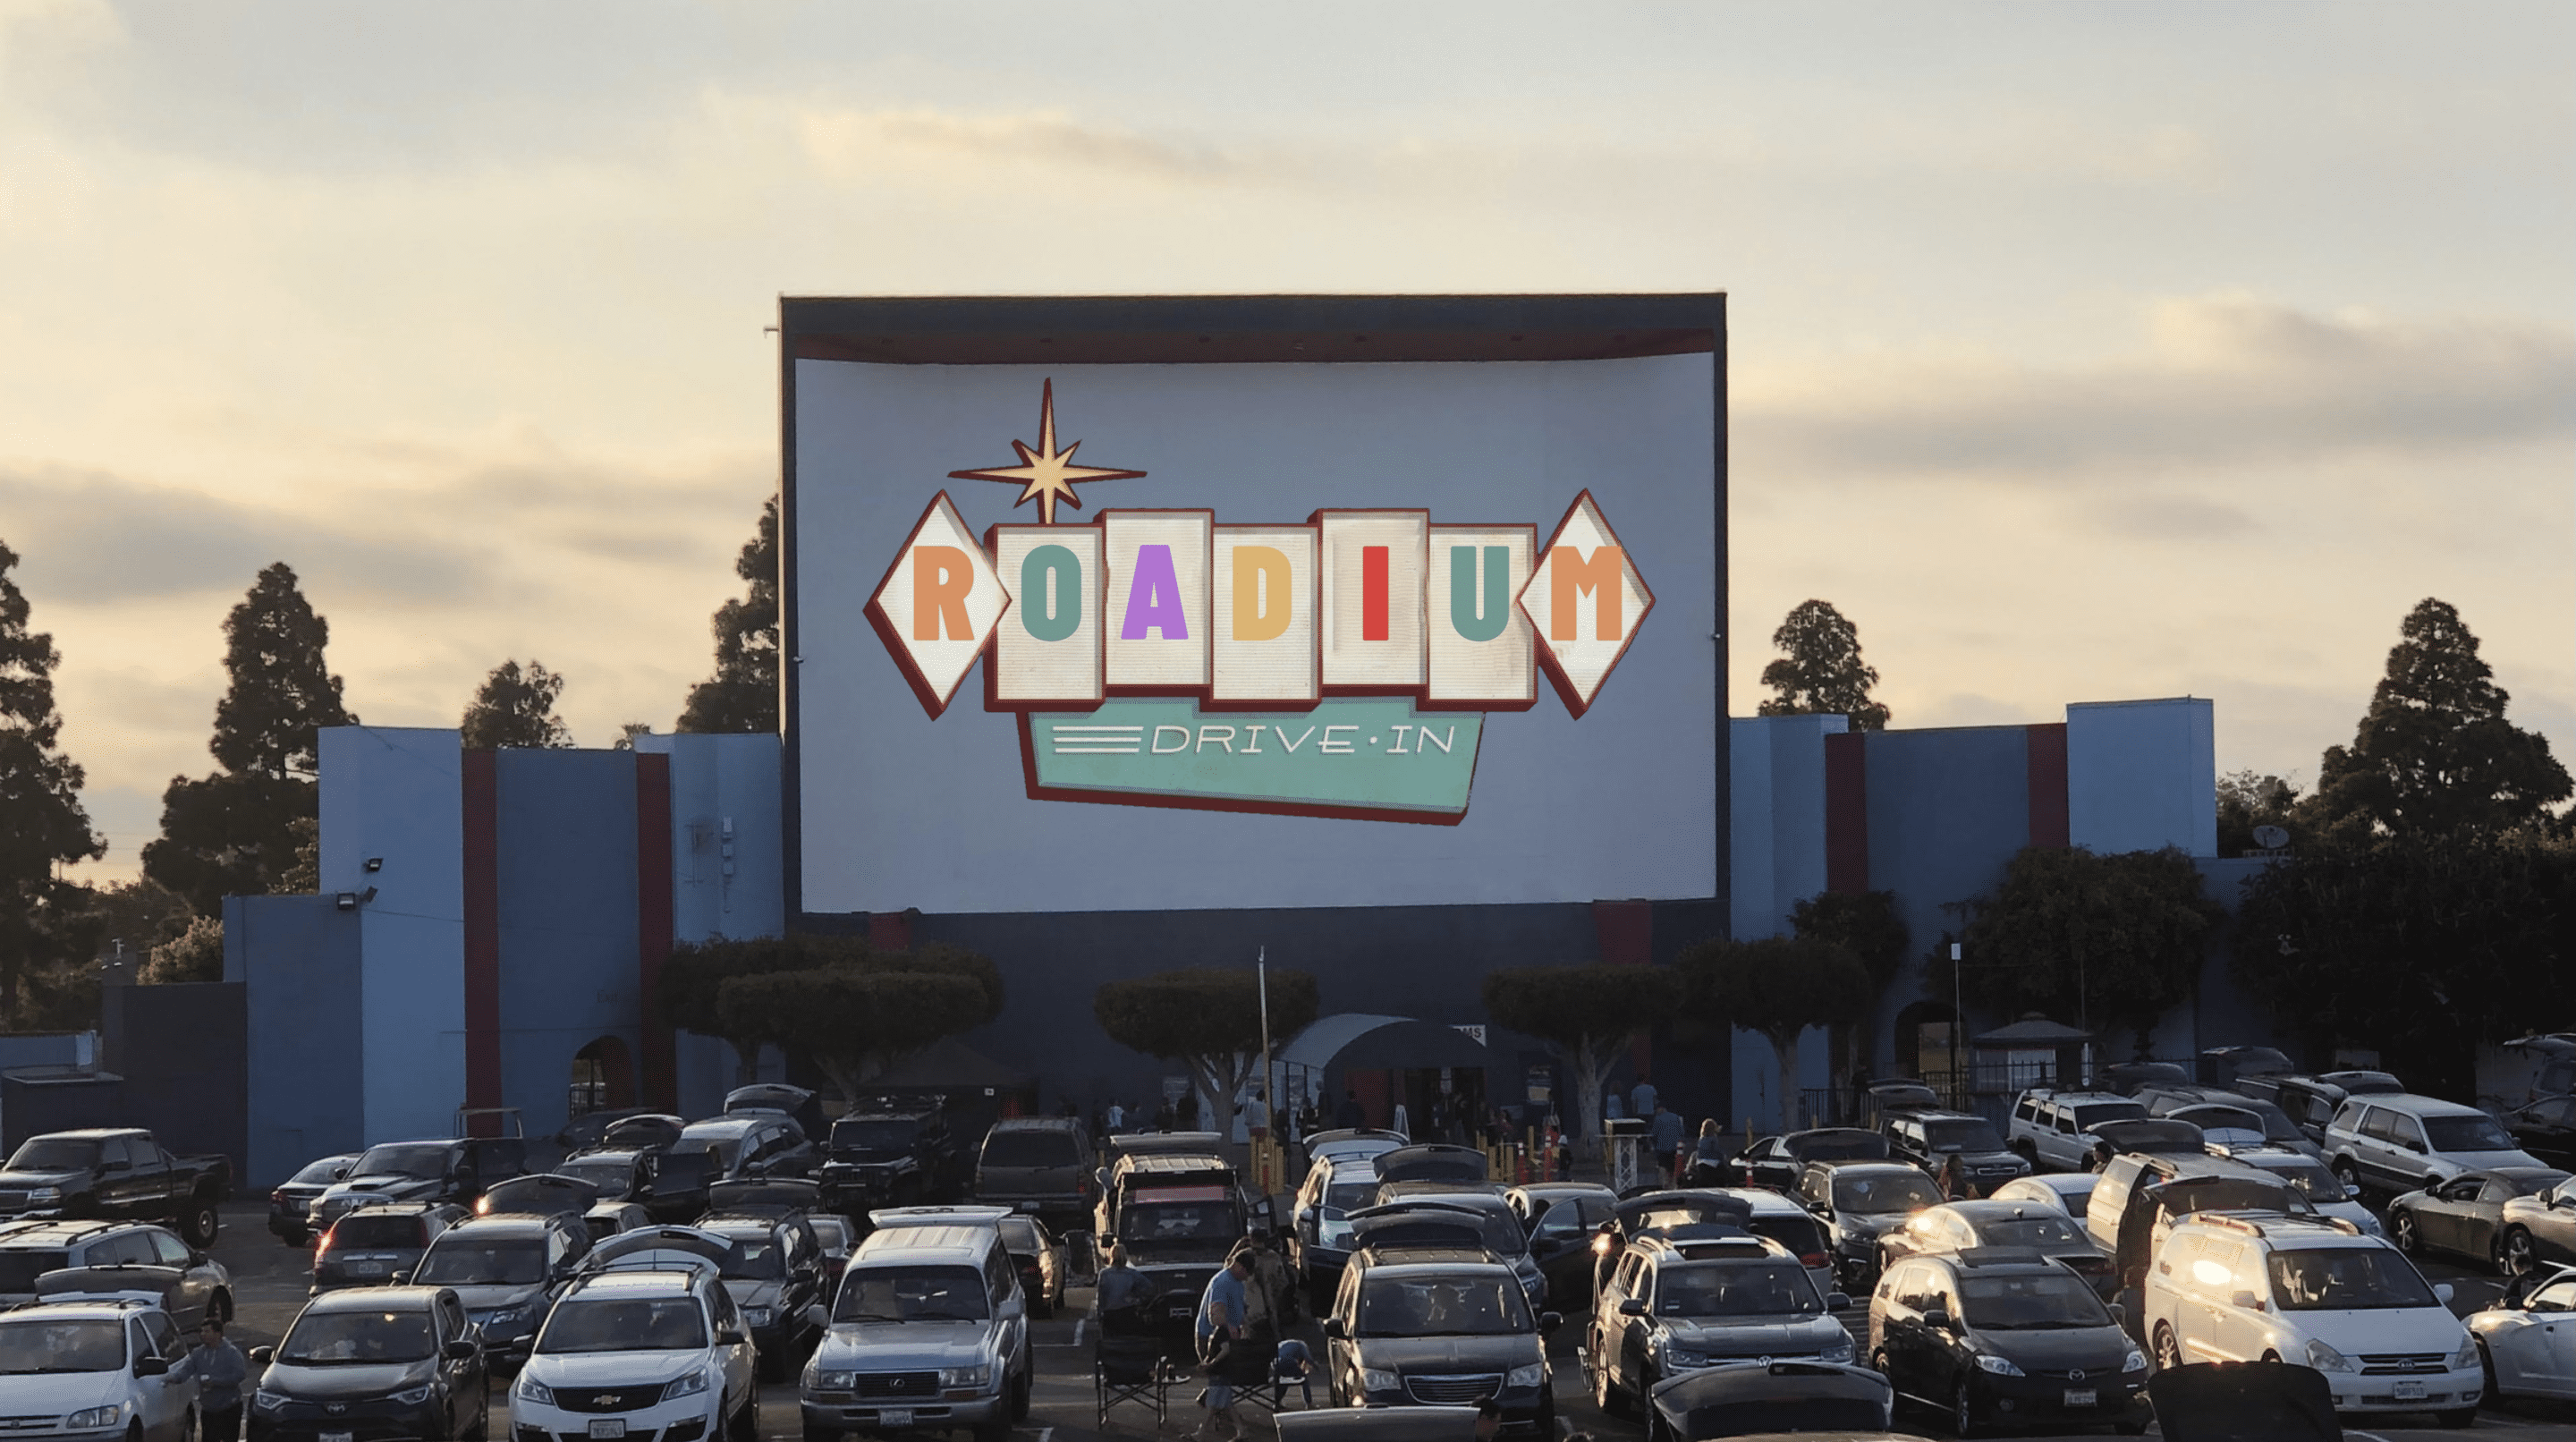 Drive-in movies are back!